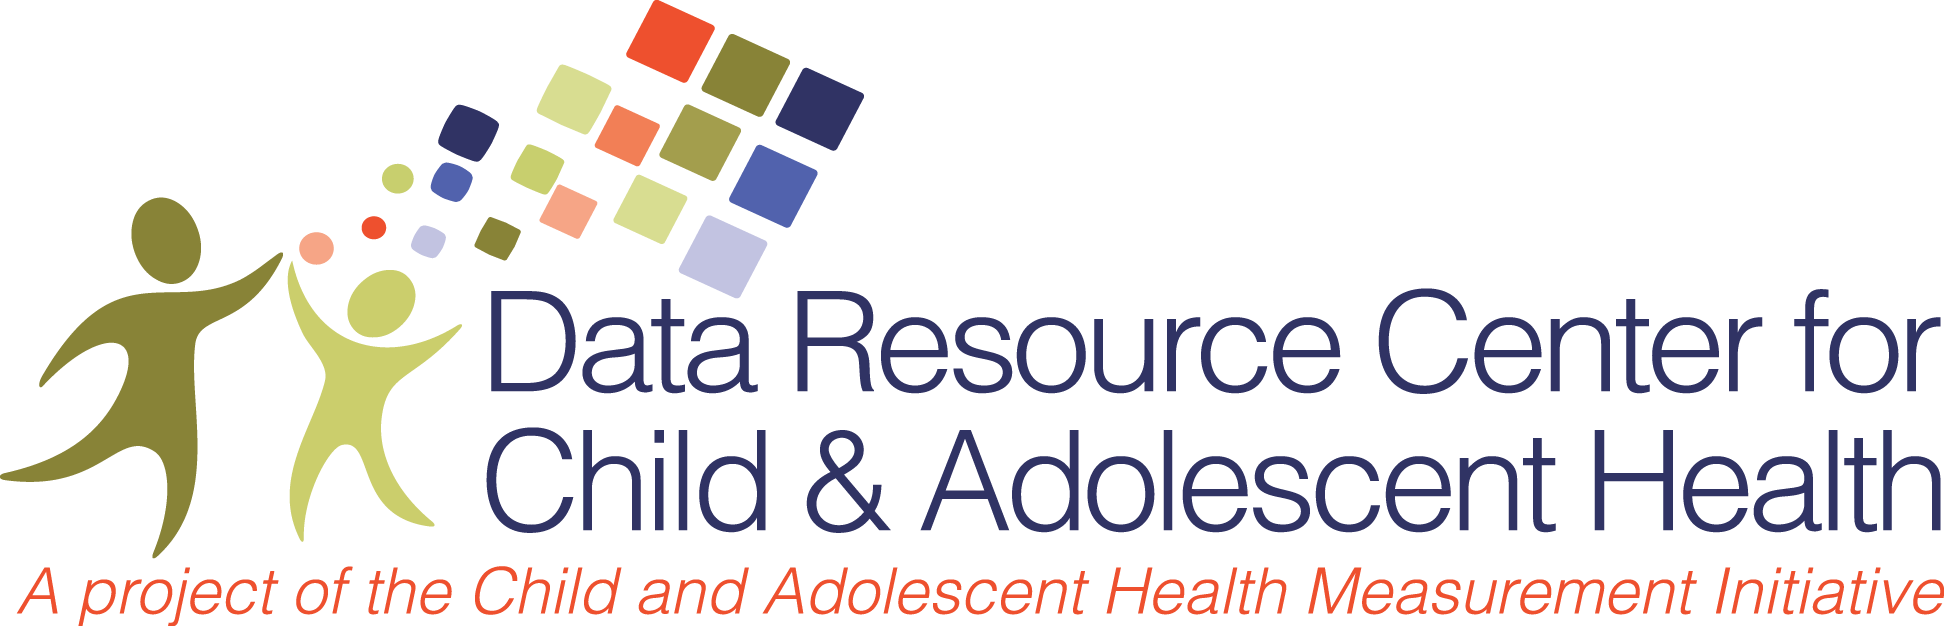 Nsch Codebooks - Data Resource Center For Child And Adolescent Health